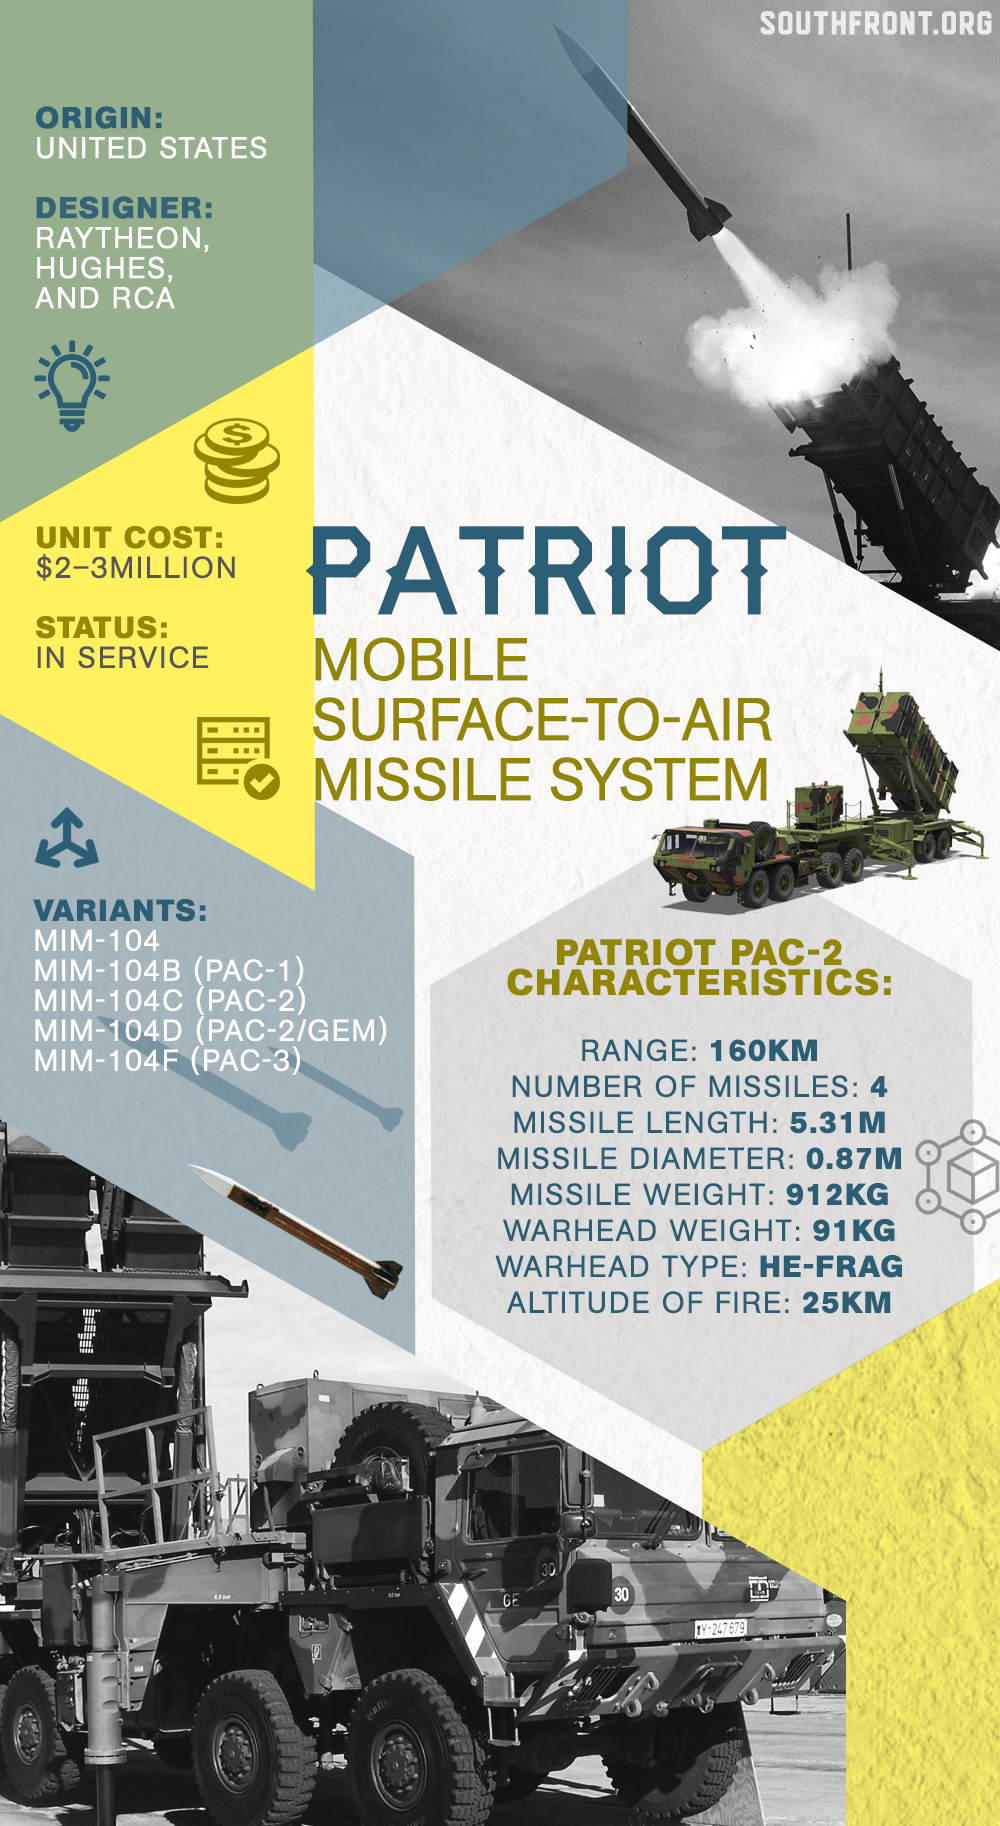 U.S. Deploys Two Batteries Of Patriot Missiles In Iraq. More To Come